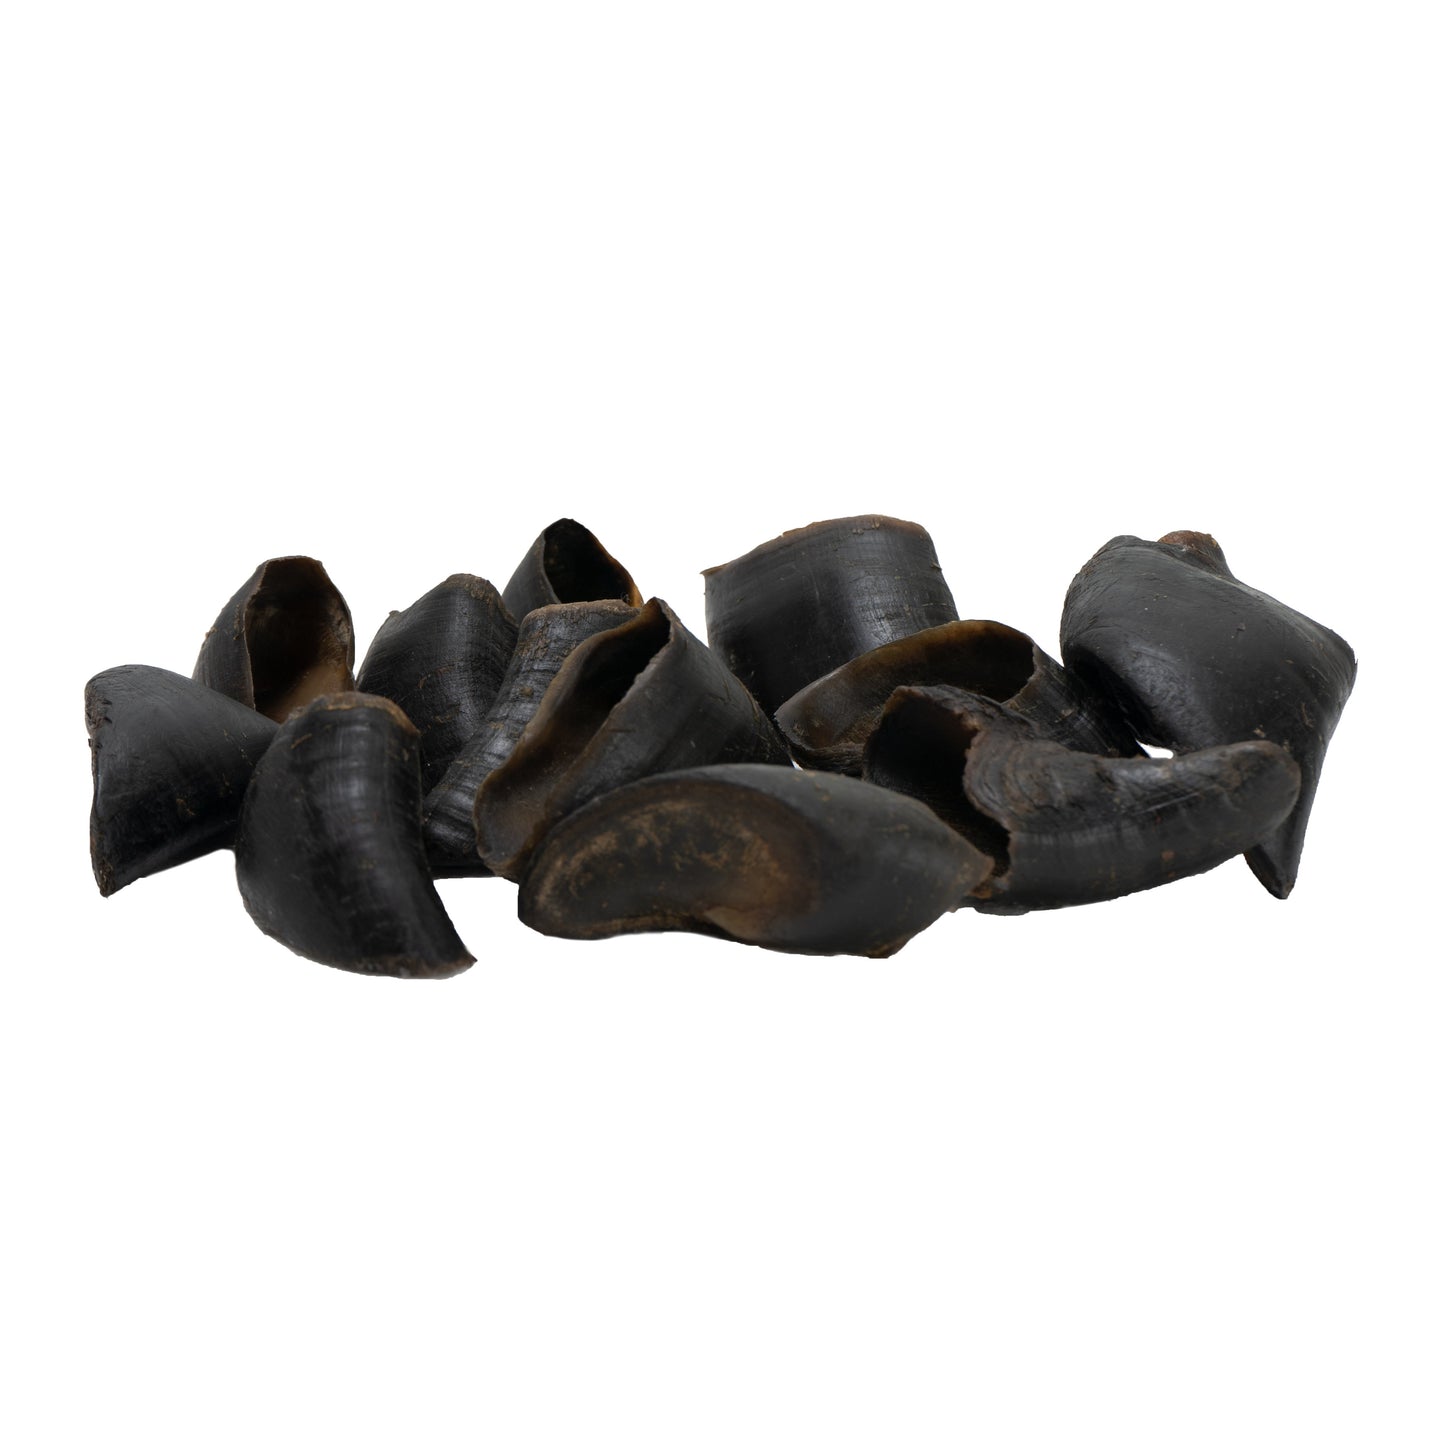 Water Buffalo Hooves Dog Chews-4 Count-10 oz